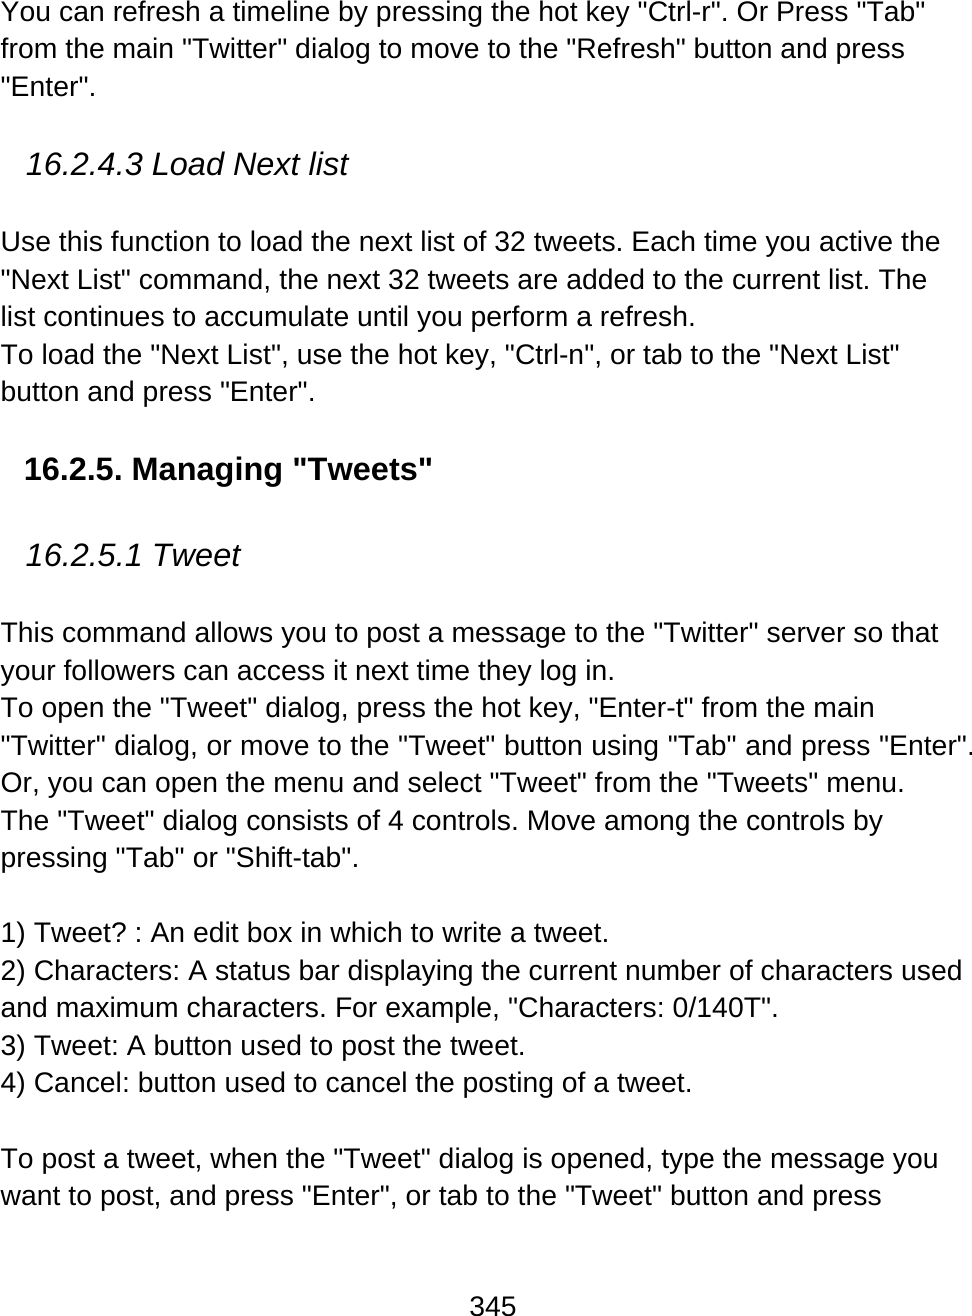 345  You can refresh a timeline by pressing the hot key &quot;Ctrl-r&quot;. Or Press &quot;Tab&quot; from the main &quot;Twitter&quot; dialog to move to the &quot;Refresh&quot; button and press &quot;Enter&quot;.  16.2.4.3 Load Next list  Use this function to load the next list of 32 tweets. Each time you active the &quot;Next List&quot; command, the next 32 tweets are added to the current list. The list continues to accumulate until you perform a refresh.  To load the &quot;Next List&quot;, use the hot key, &quot;Ctrl-n&quot;, or tab to the &quot;Next List&quot; button and press &quot;Enter&quot;.  16.2.5. Managing &quot;Tweets&quot;  16.2.5.1 Tweet  This command allows you to post a message to the &quot;Twitter&quot; server so that your followers can access it next time they log in. To open the &quot;Tweet&quot; dialog, press the hot key, &quot;Enter-t&quot; from the main &quot;Twitter&quot; dialog, or move to the &quot;Tweet&quot; button using &quot;Tab&quot; and press &quot;Enter&quot;. Or, you can open the menu and select &quot;Tweet&quot; from the &quot;Tweets&quot; menu.  The &quot;Tweet&quot; dialog consists of 4 controls. Move among the controls by pressing &quot;Tab&quot; or &quot;Shift-tab&quot;.  1) Tweet? : An edit box in which to write a tweet.  2) Characters: A status bar displaying the current number of characters used and maximum characters. For example, &quot;Characters: 0/140T&quot;. 3) Tweet: A button used to post the tweet.  4) Cancel: button used to cancel the posting of a tweet.    To post a tweet, when the &quot;Tweet&quot; dialog is opened, type the message you want to post, and press &quot;Enter&quot;, or tab to the &quot;Tweet&quot; button and press 